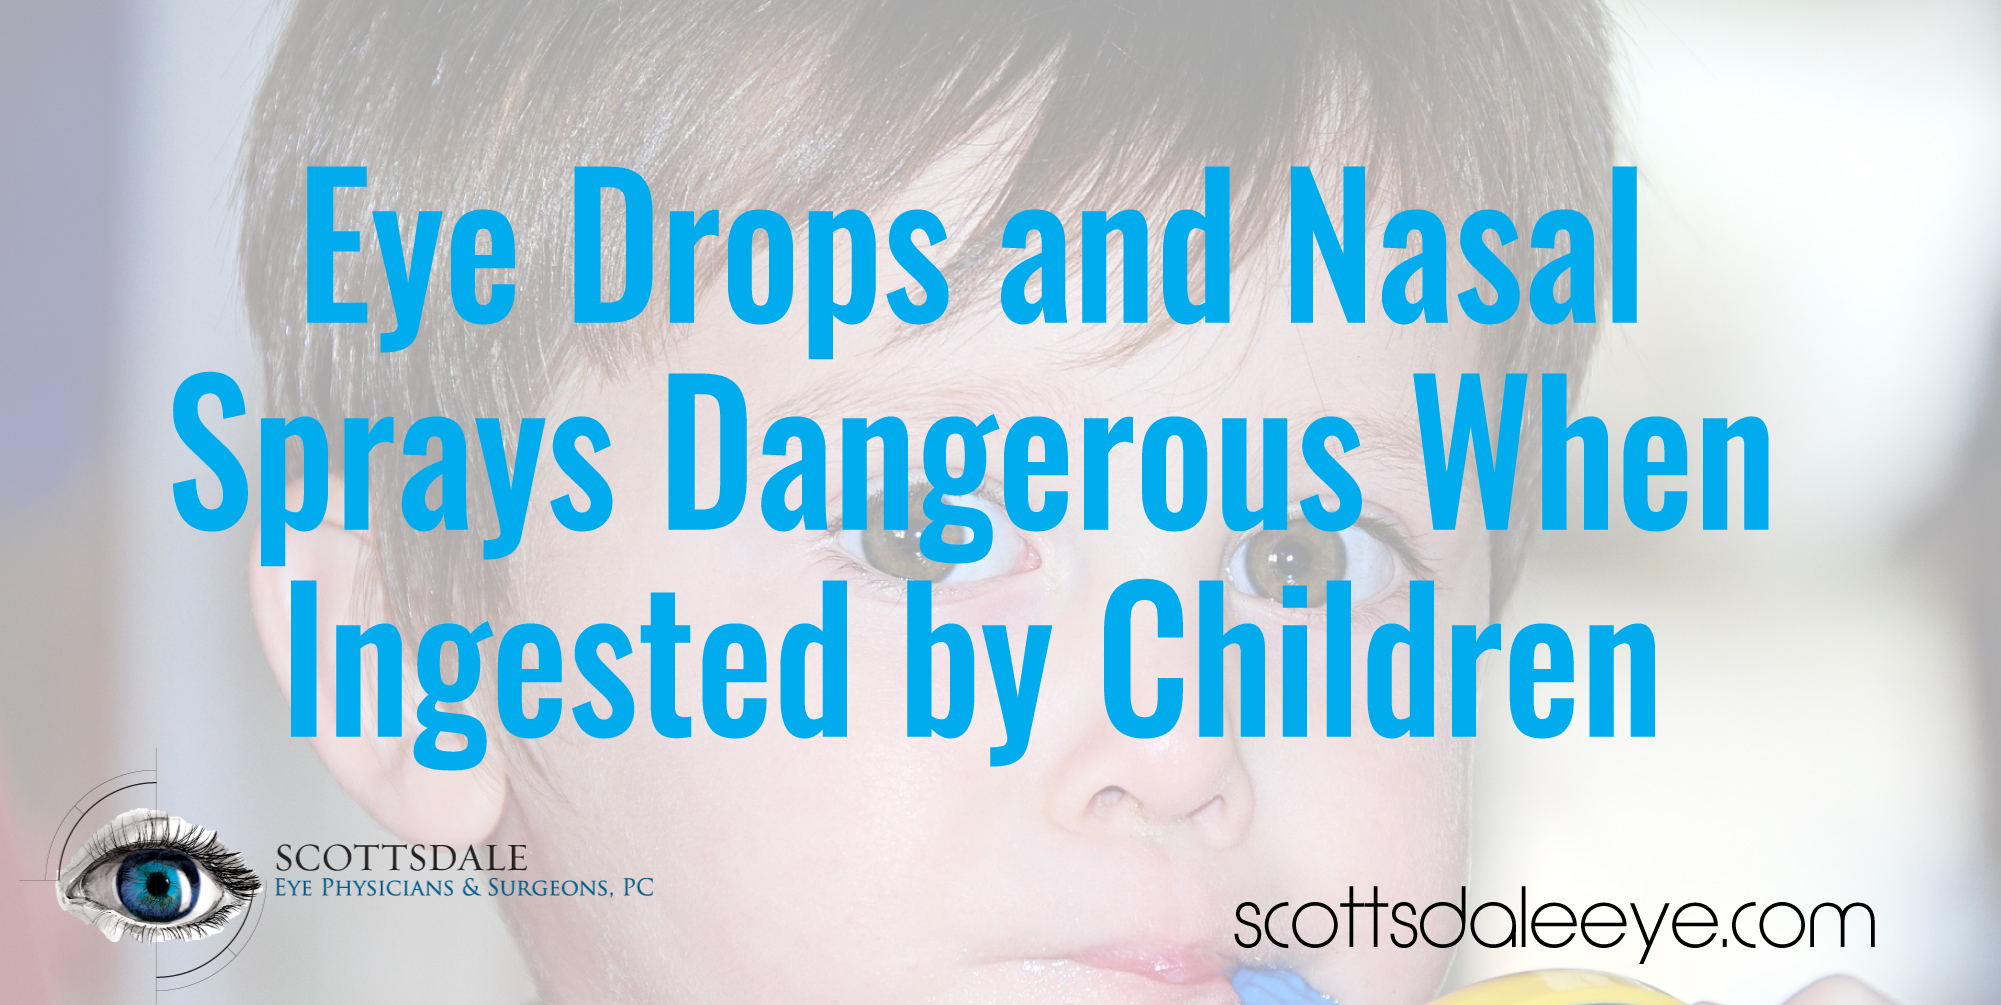 Eye Drops and Nasal Sprays Dangerous When Ingested by Children 